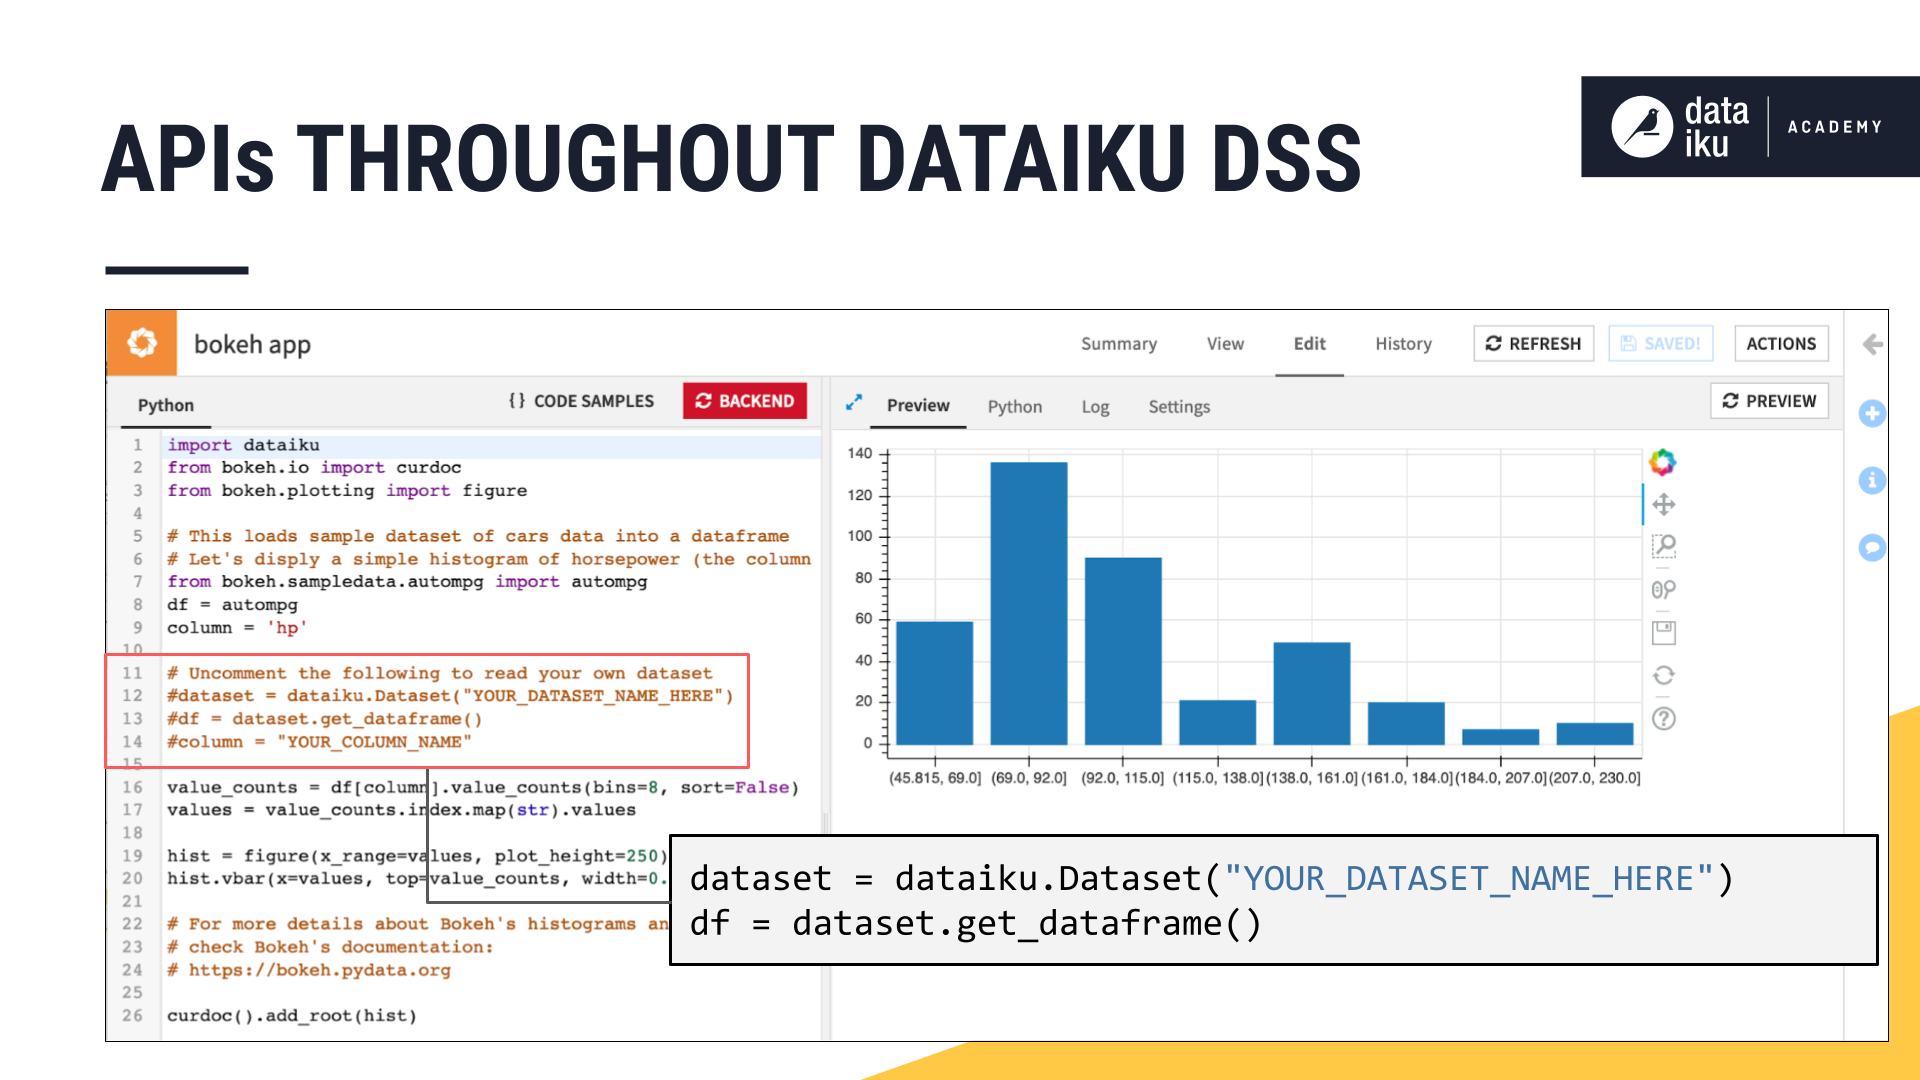 A slide introducing how APIs can be used through Dataiku such as in webapps.